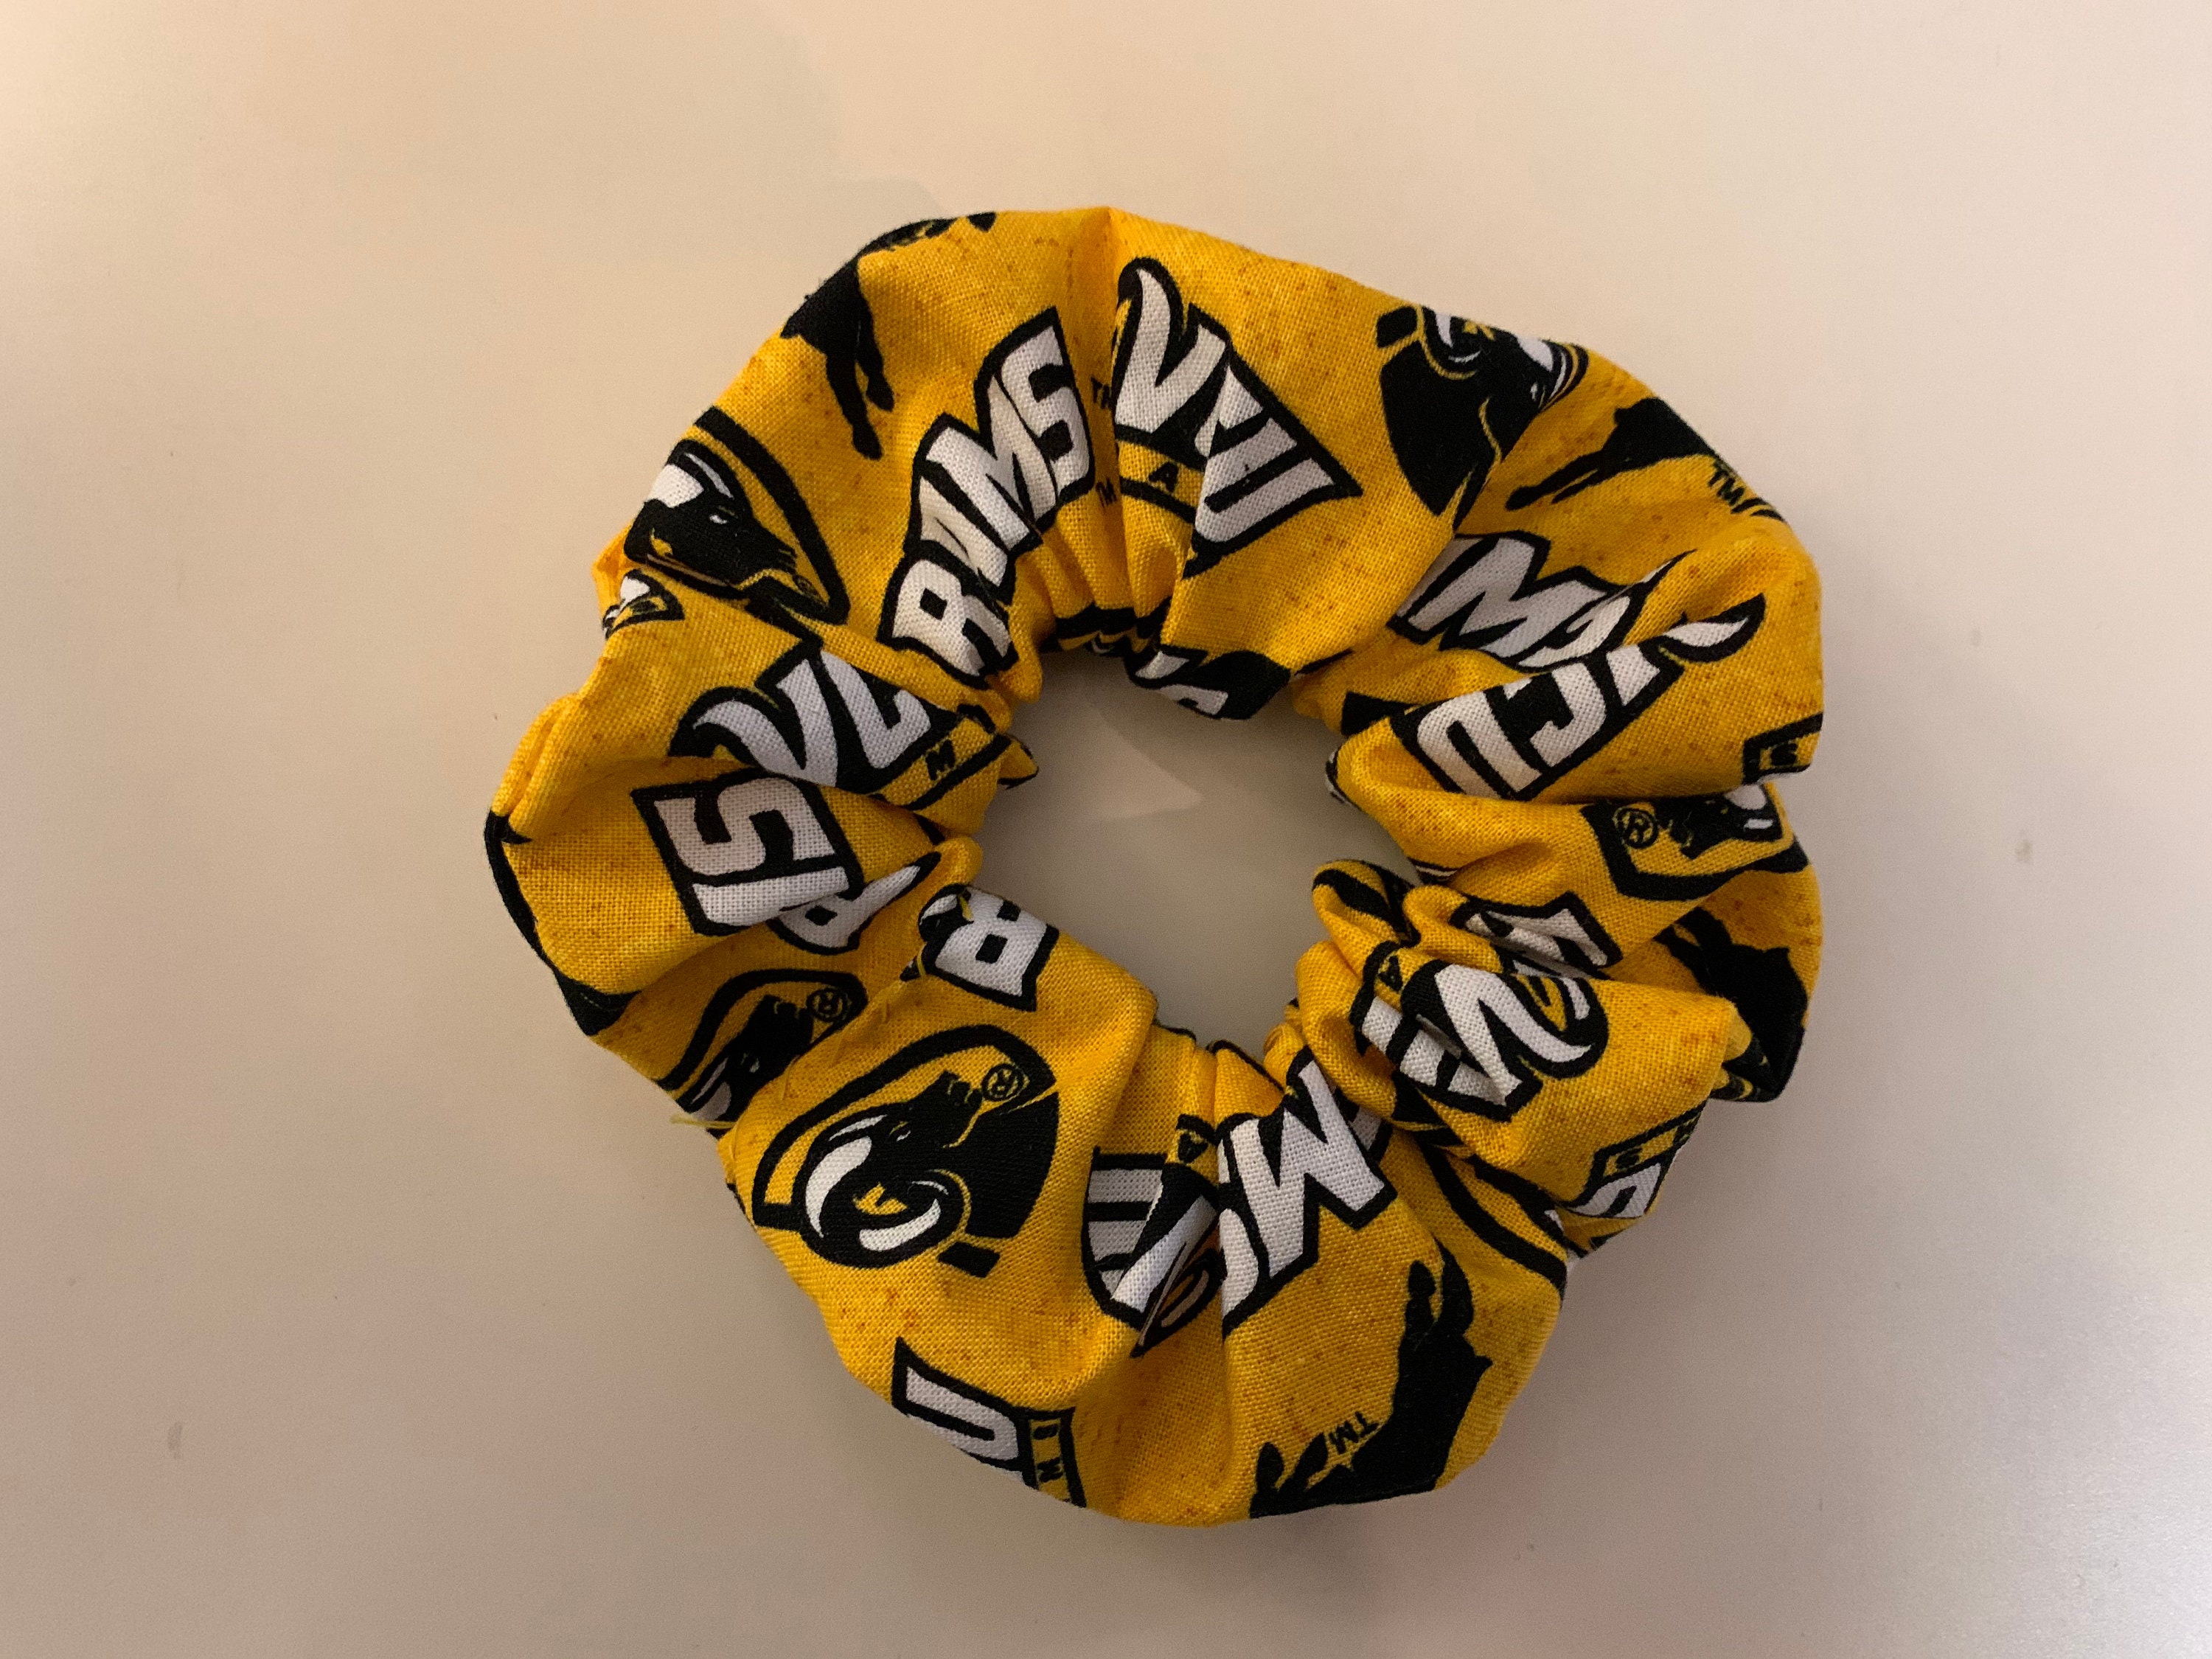 Vcu Virginia Commonwealth University Scrunchie | Not A Licensed Ncaa Product